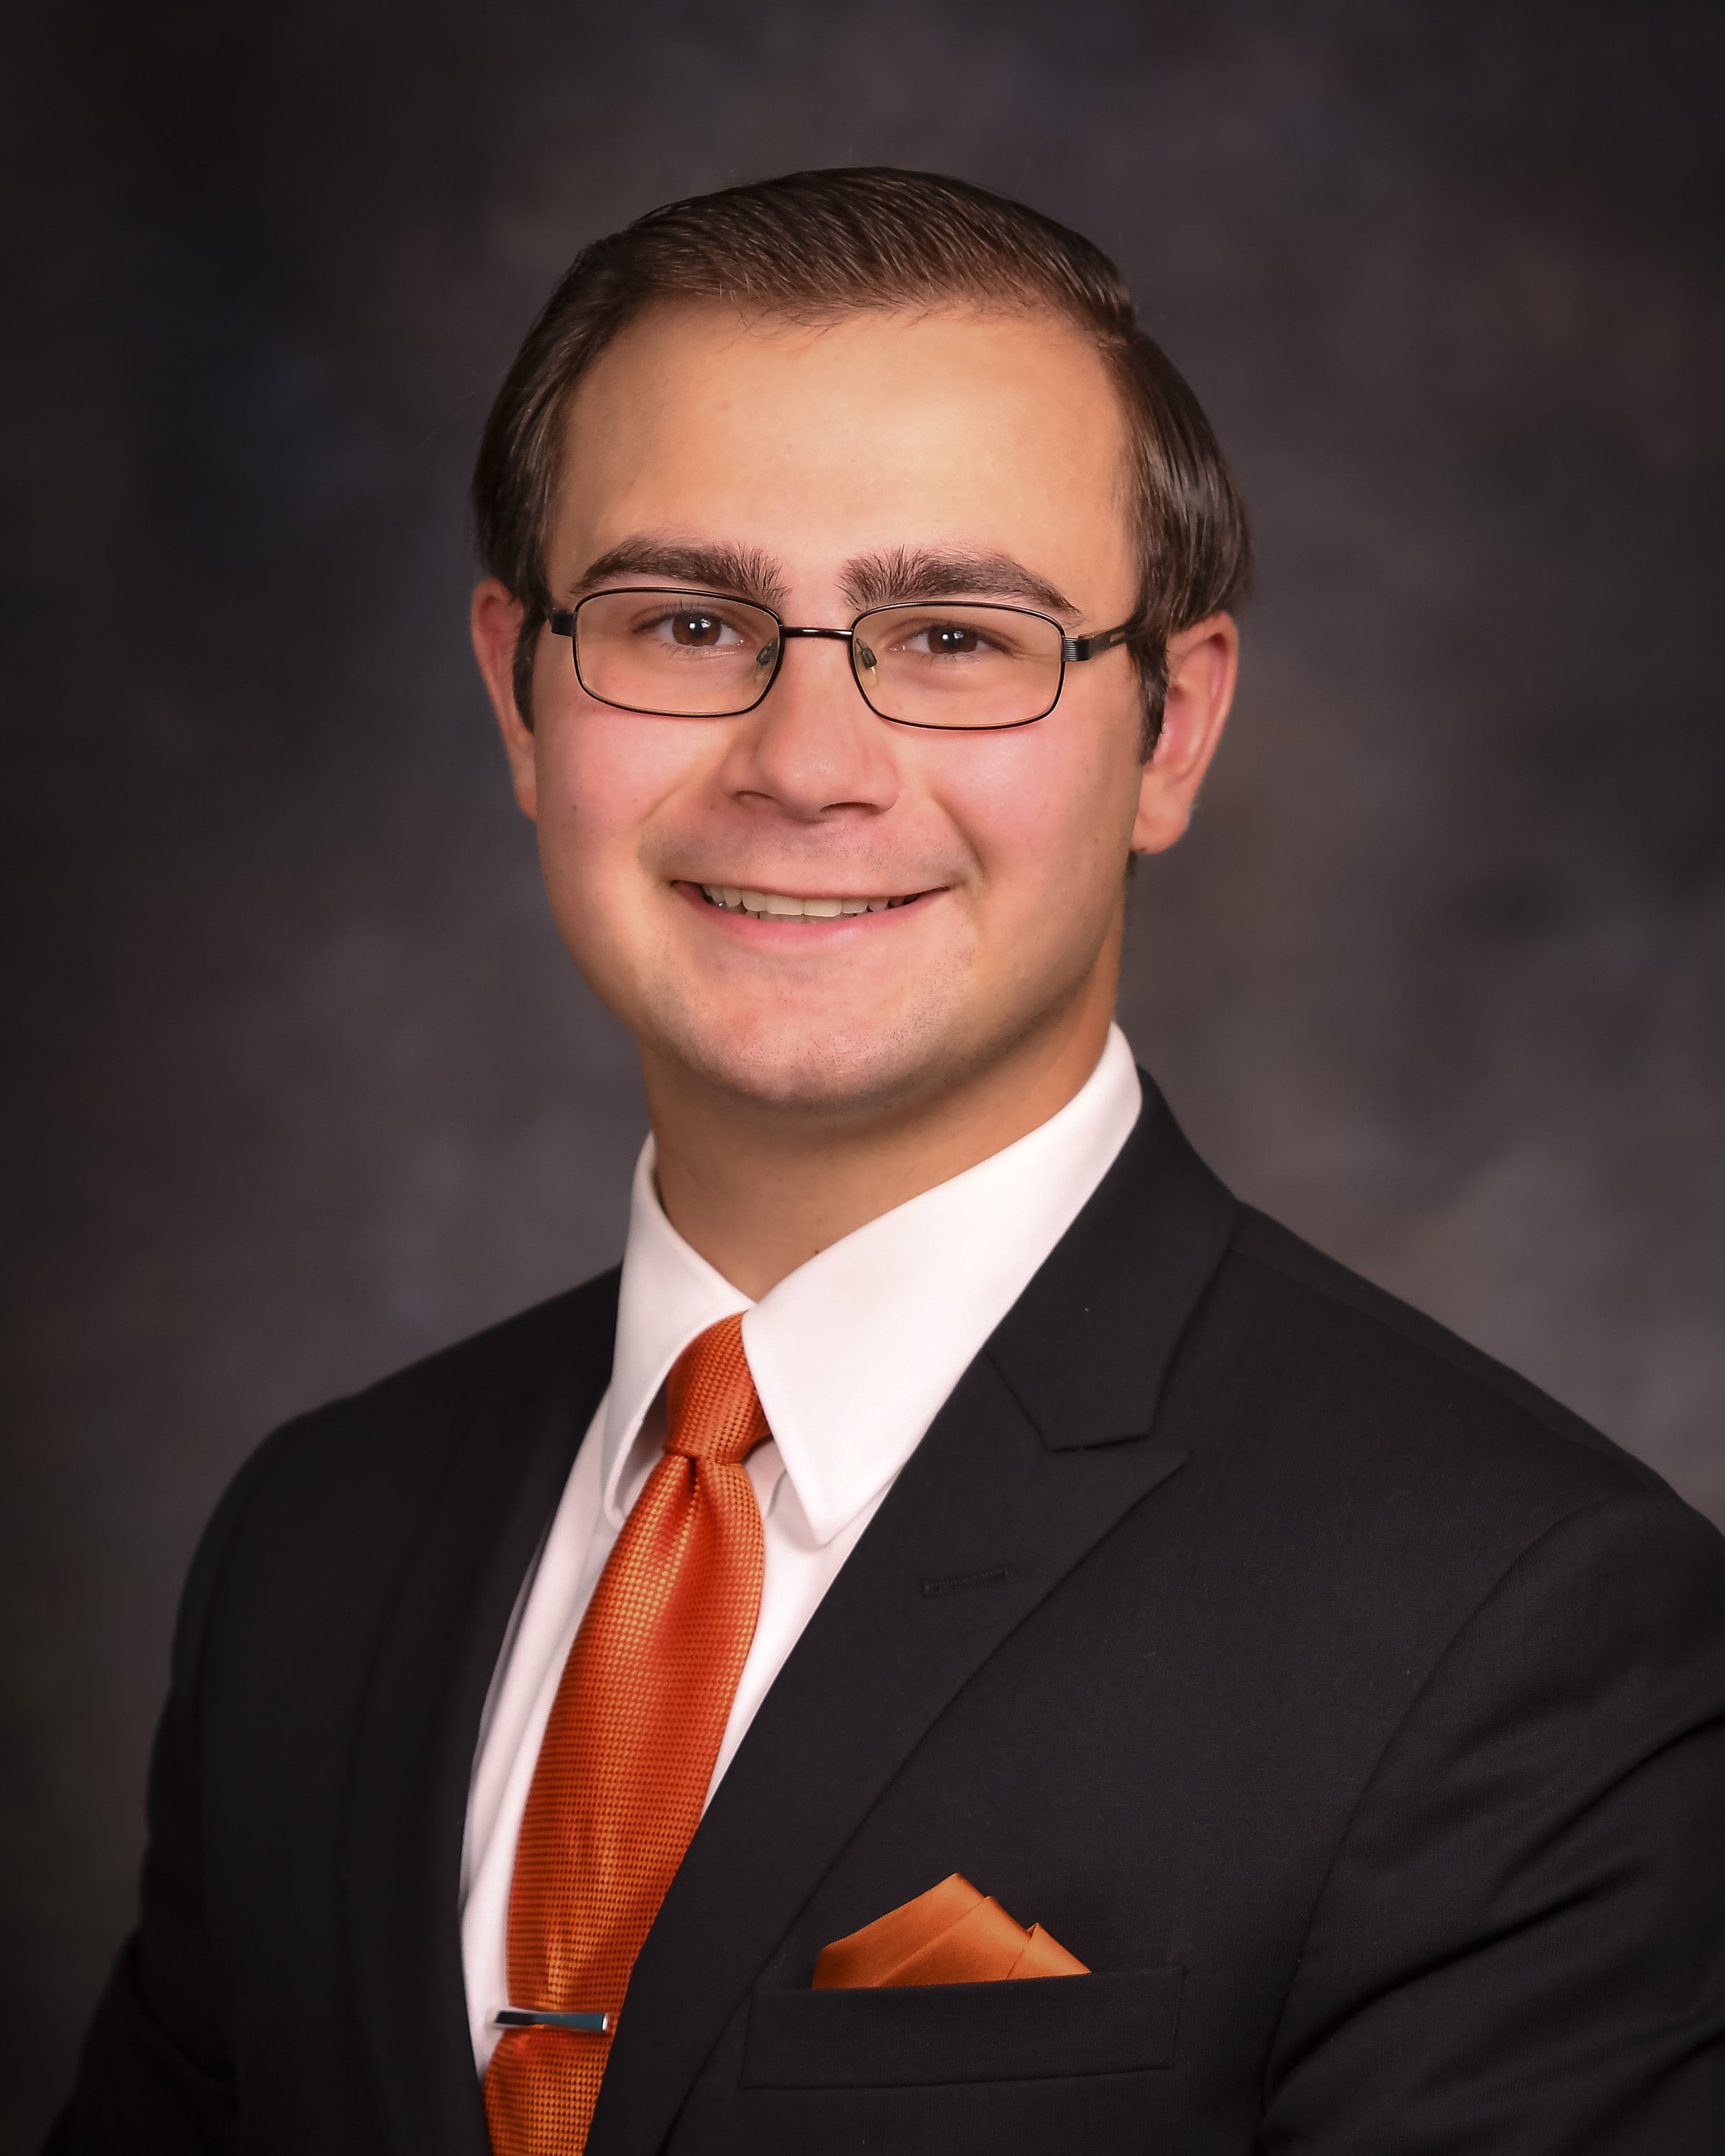 Lincoln County 4-H Member Jacob Sestak Inducted into the Oklahoma 4-H Hall of Fame